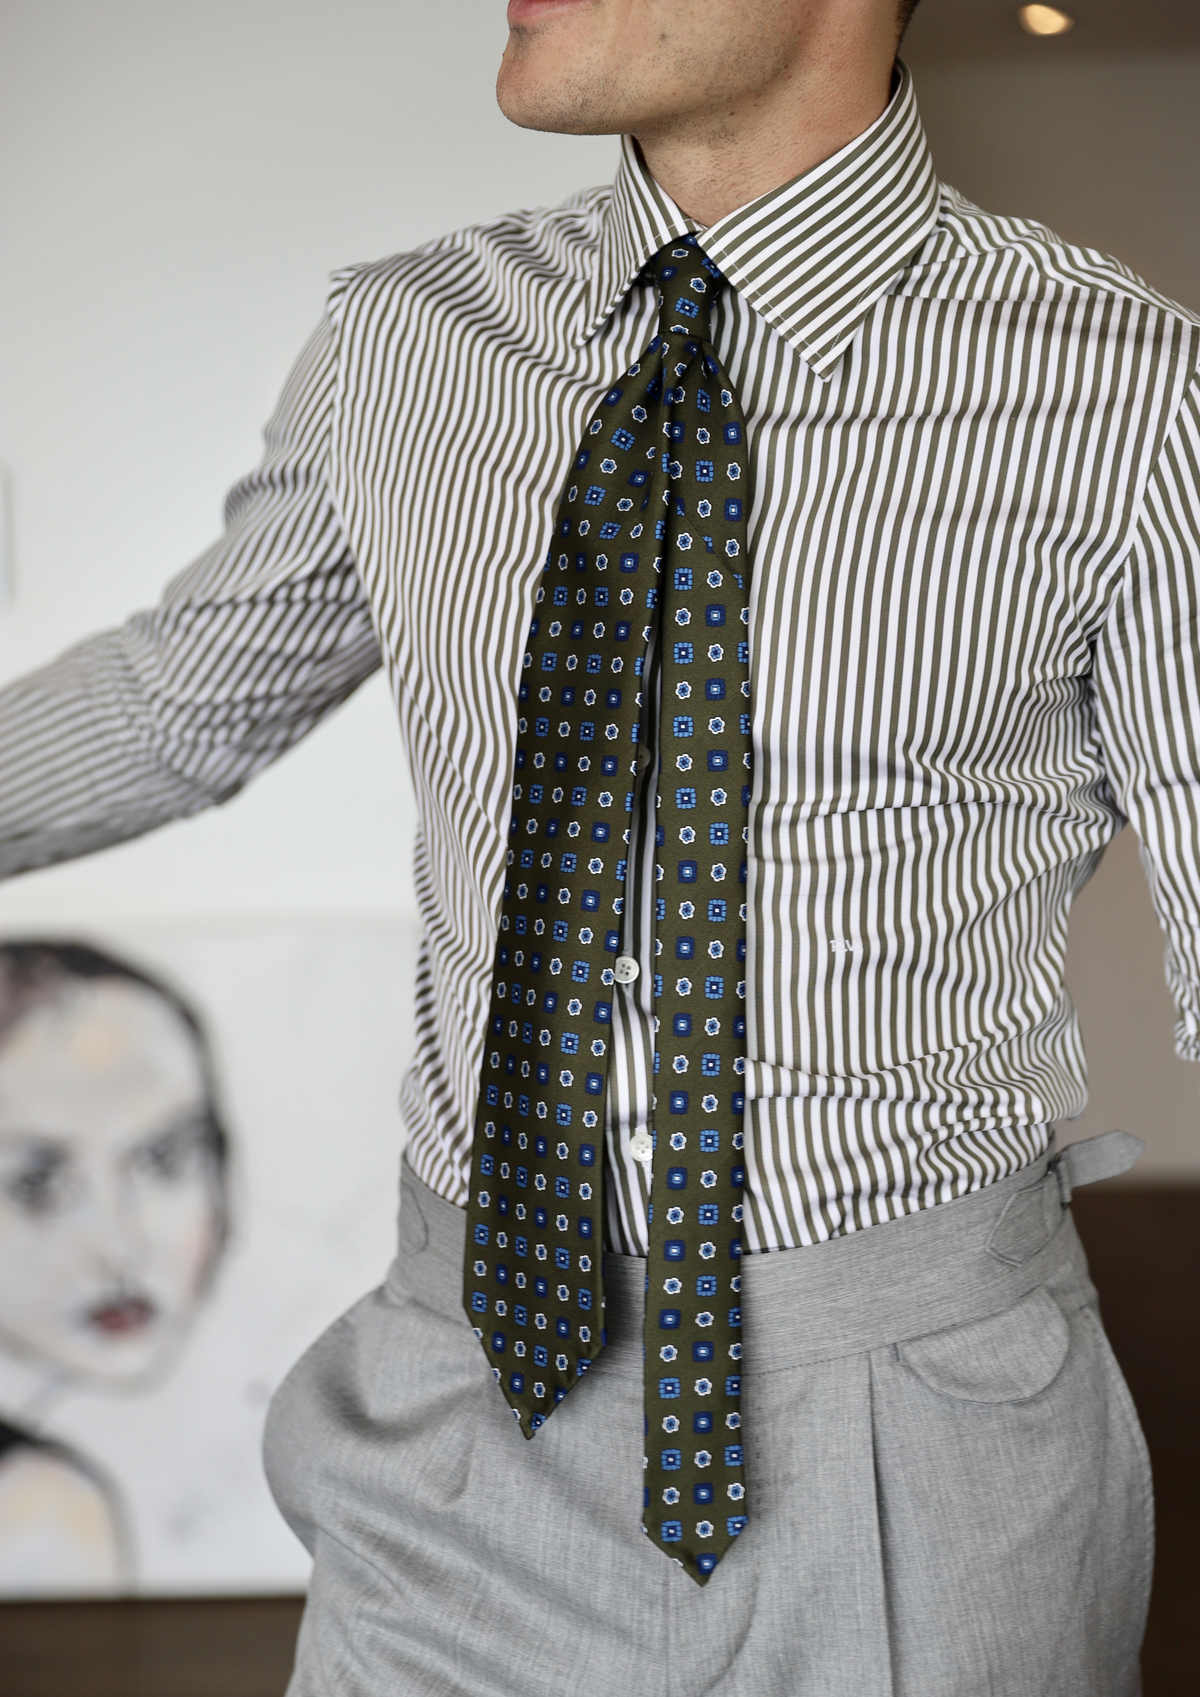 Man wearing a striped Amarcord shirt and a fitting tie